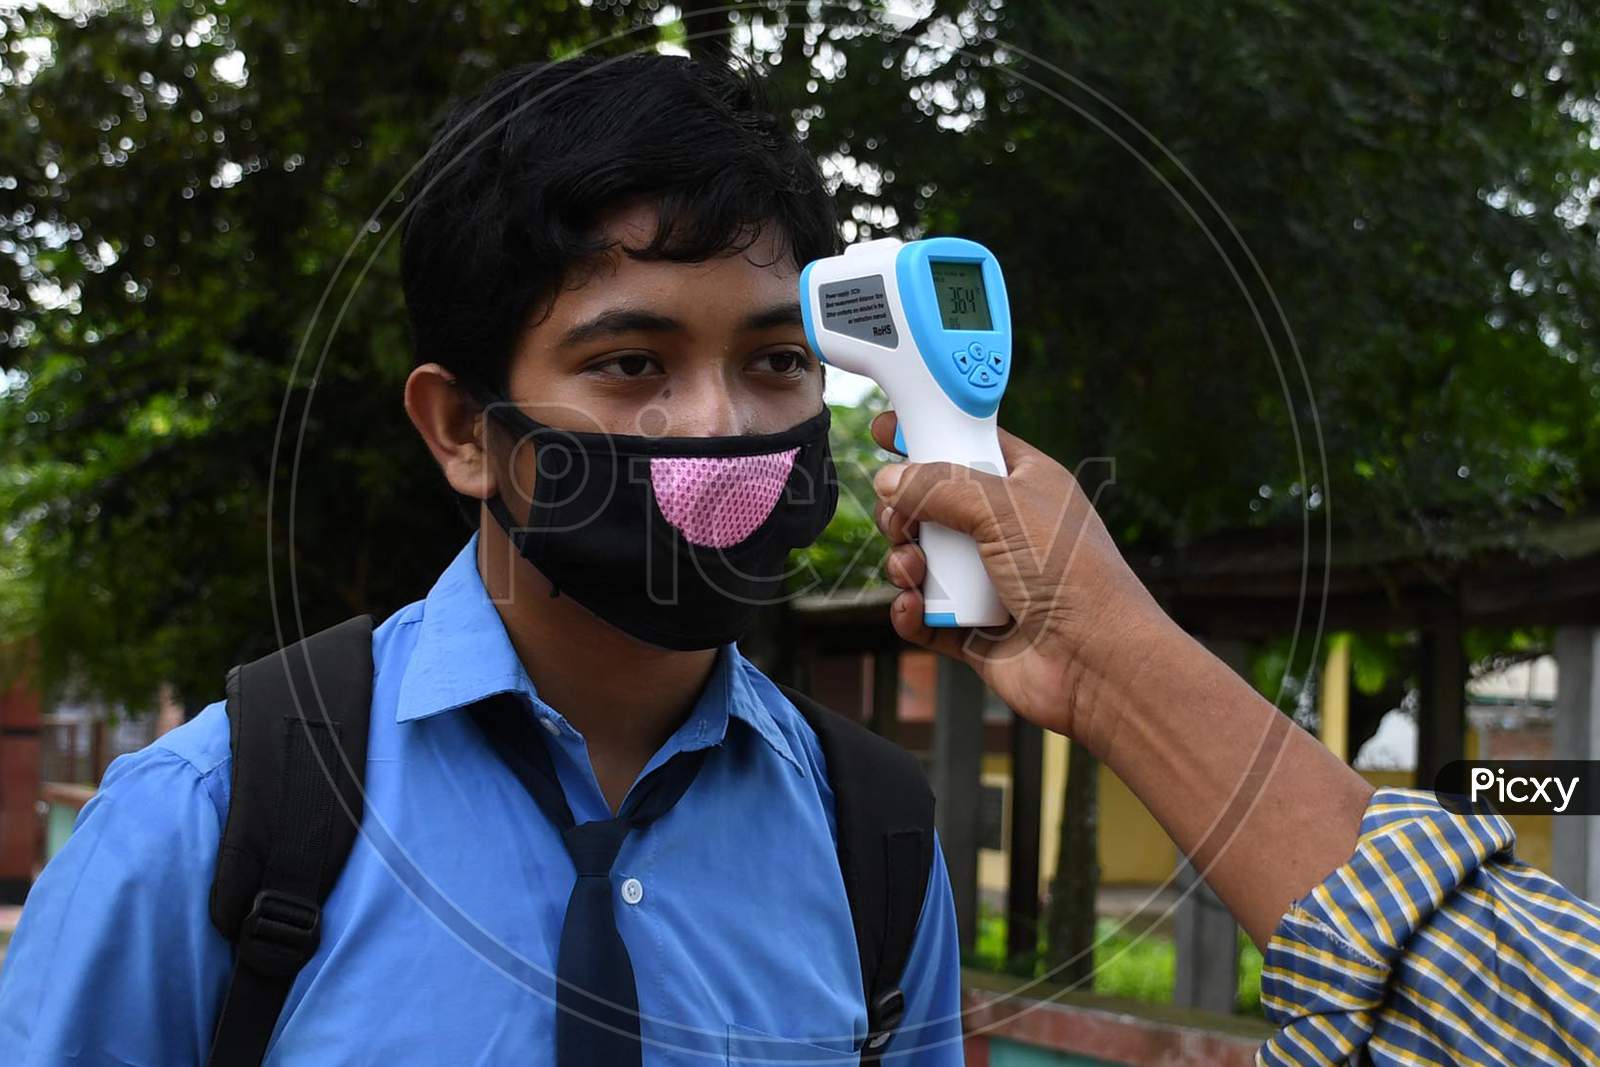 A student  gets his  body temperature check at the entrance gate of a school as schools reopened after more than 5-months closure due to the Covid-19 coronavirus pandemic in  Nagaon District of Assam on  sep 21,2020.